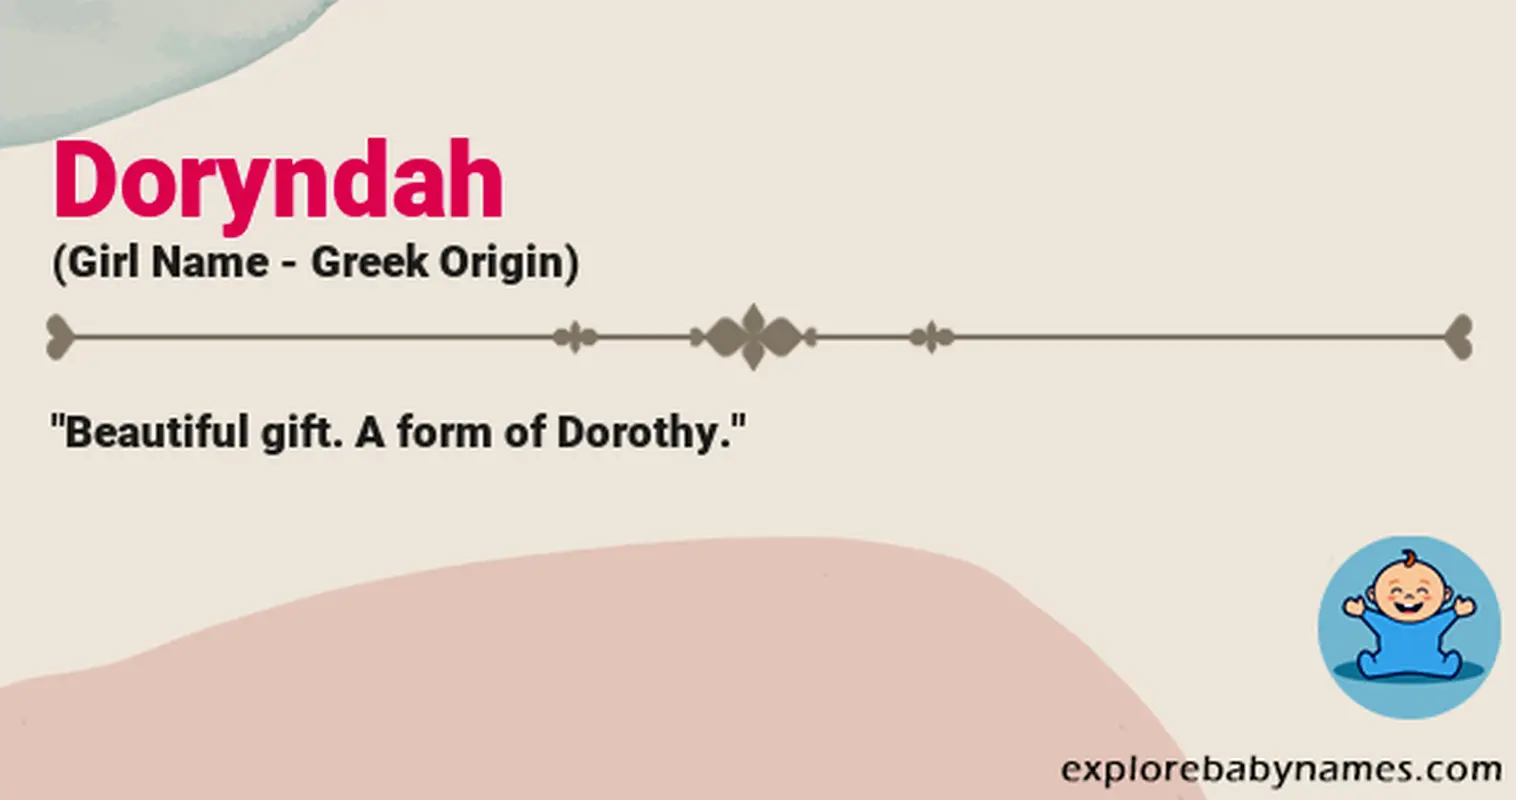 Meaning of Doryndah